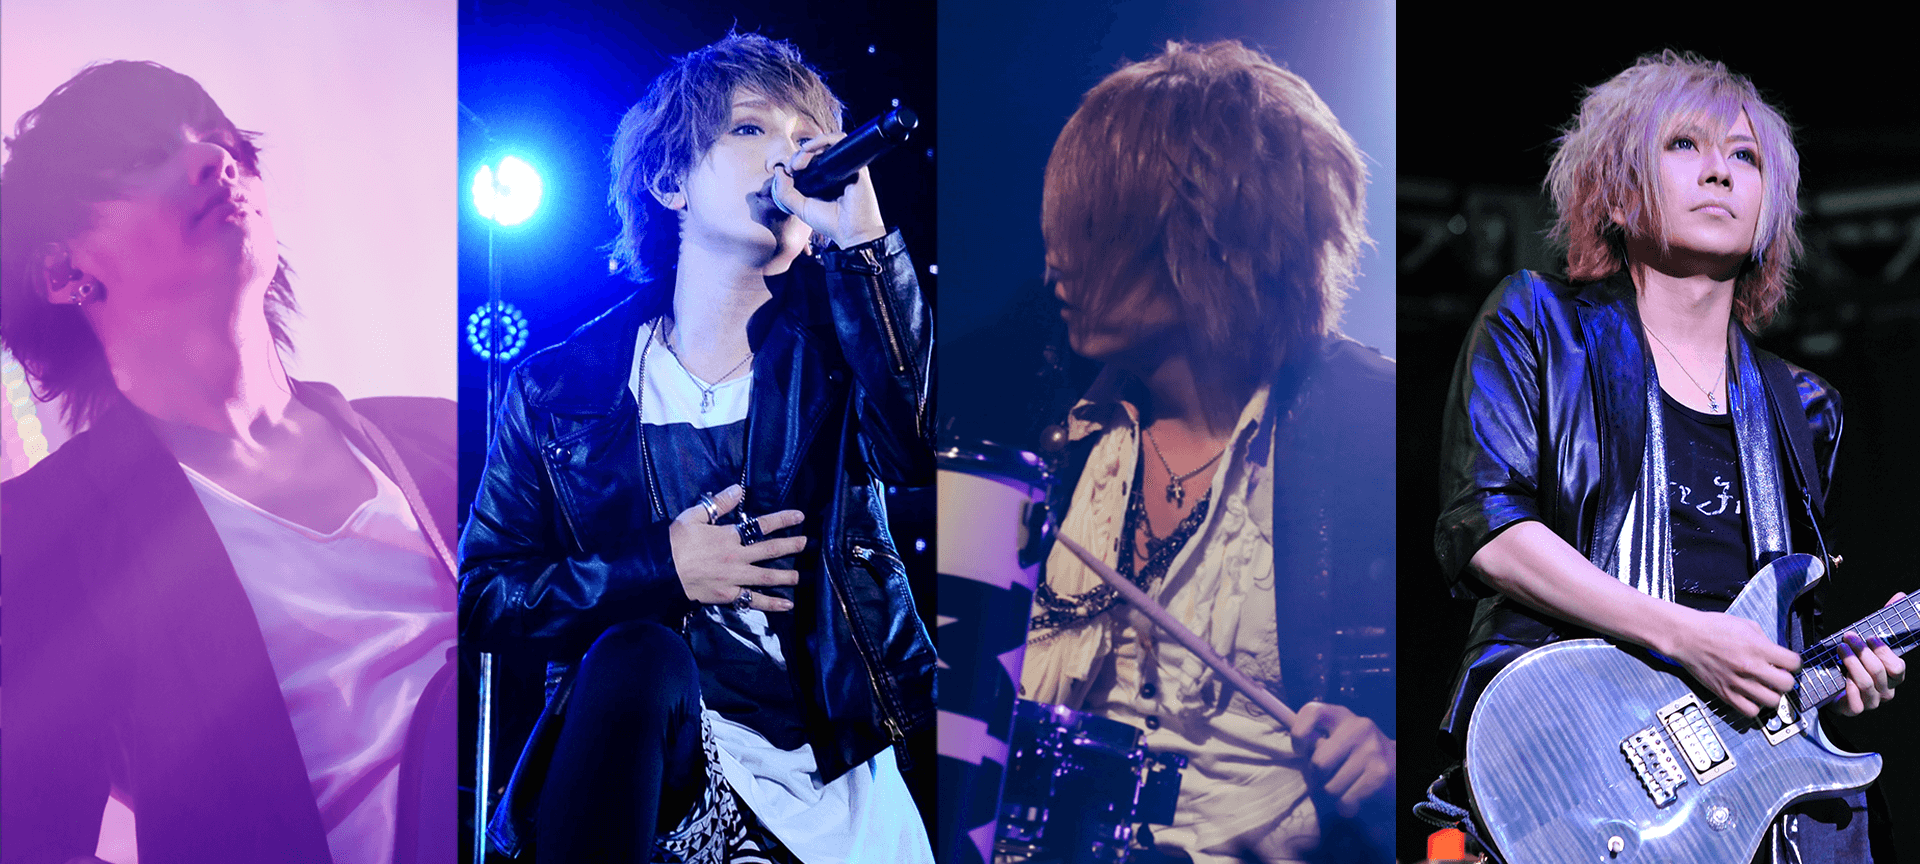 DIV revival live 「NEVER DIVIDED,JUST DIVE」 announced